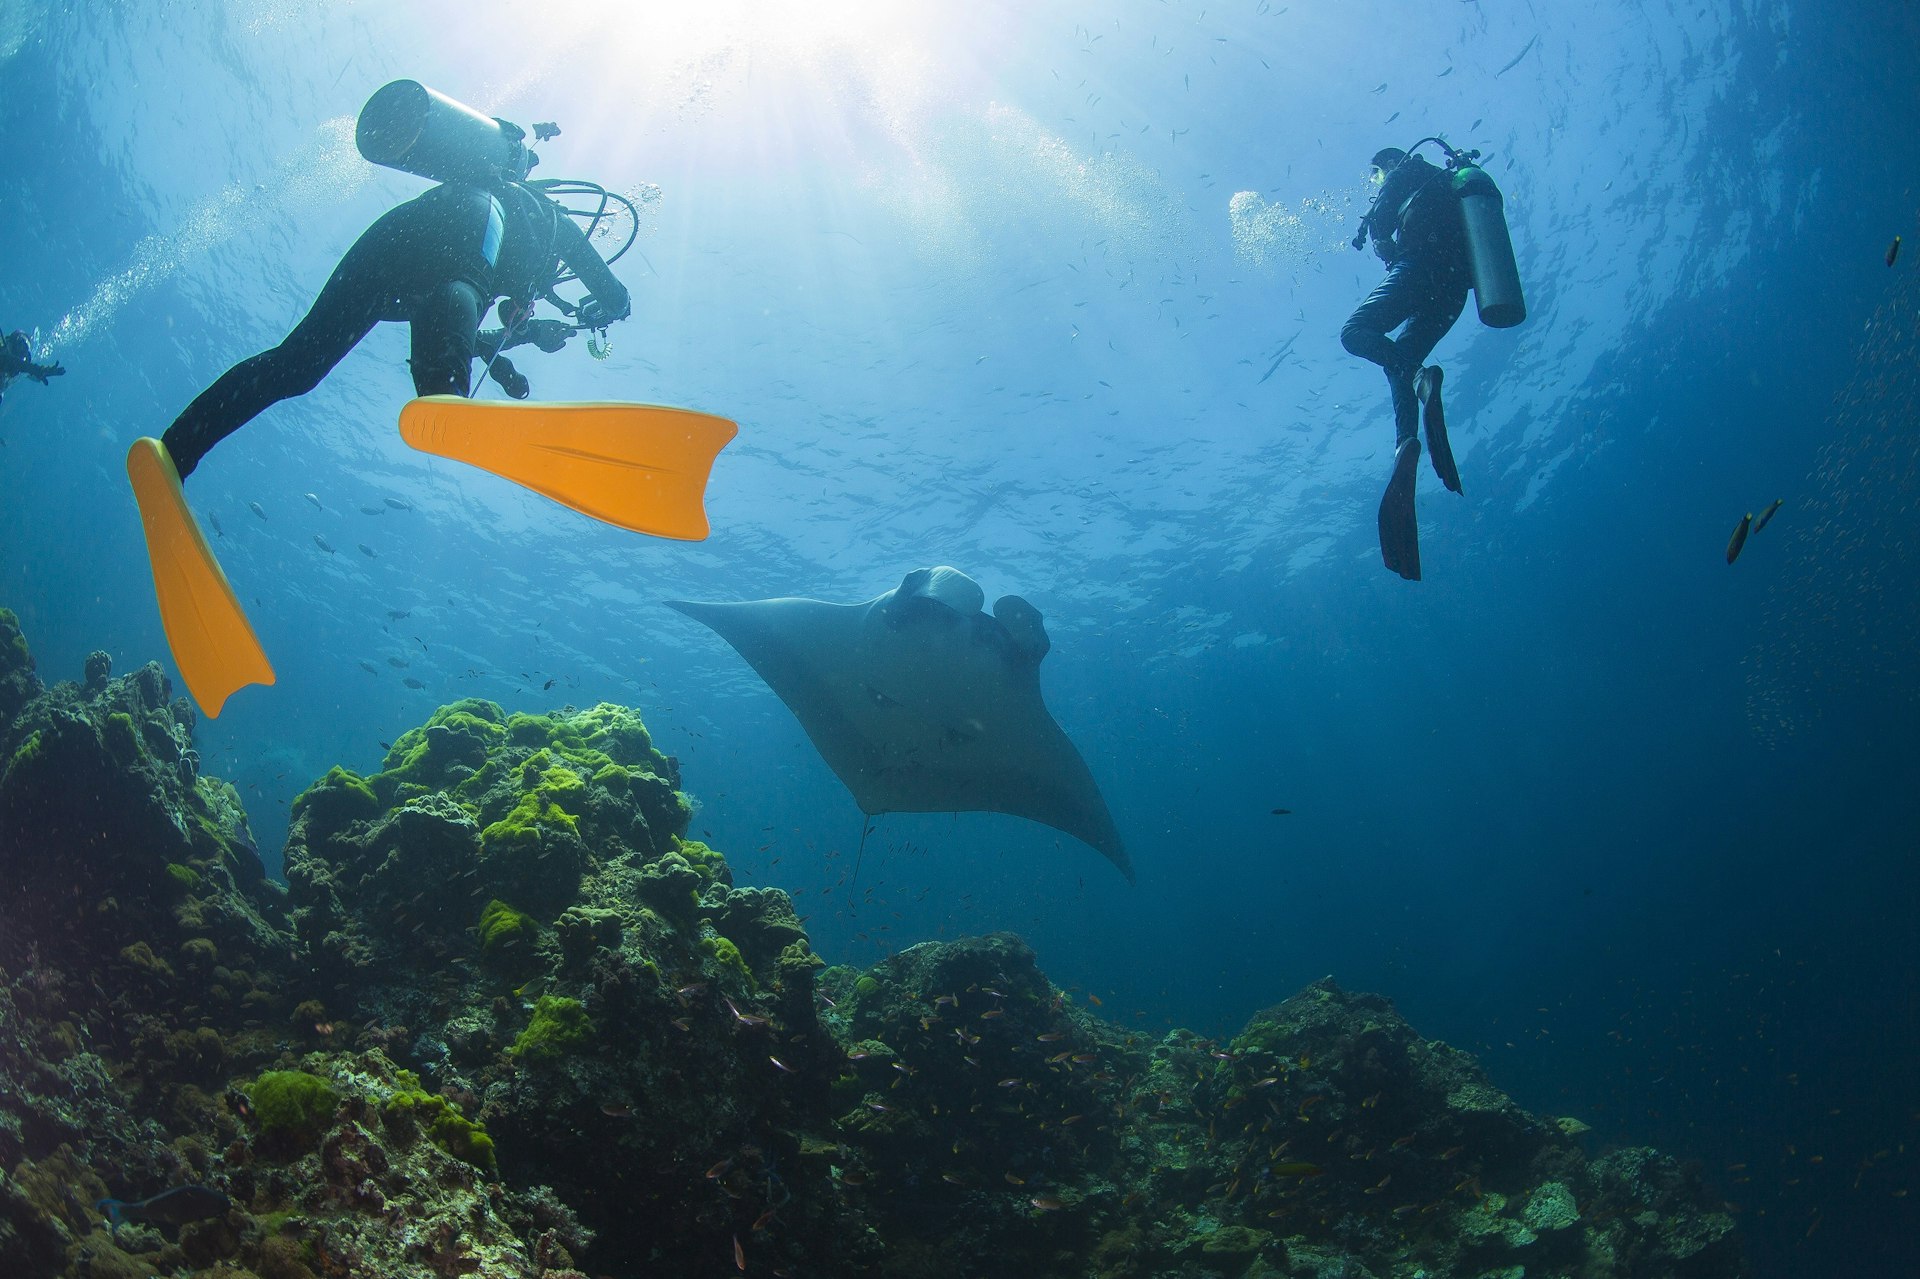 Upward angle from deep in the ocean. Two divers are looking upwards at the silhouette of a manta ray swimming overhead